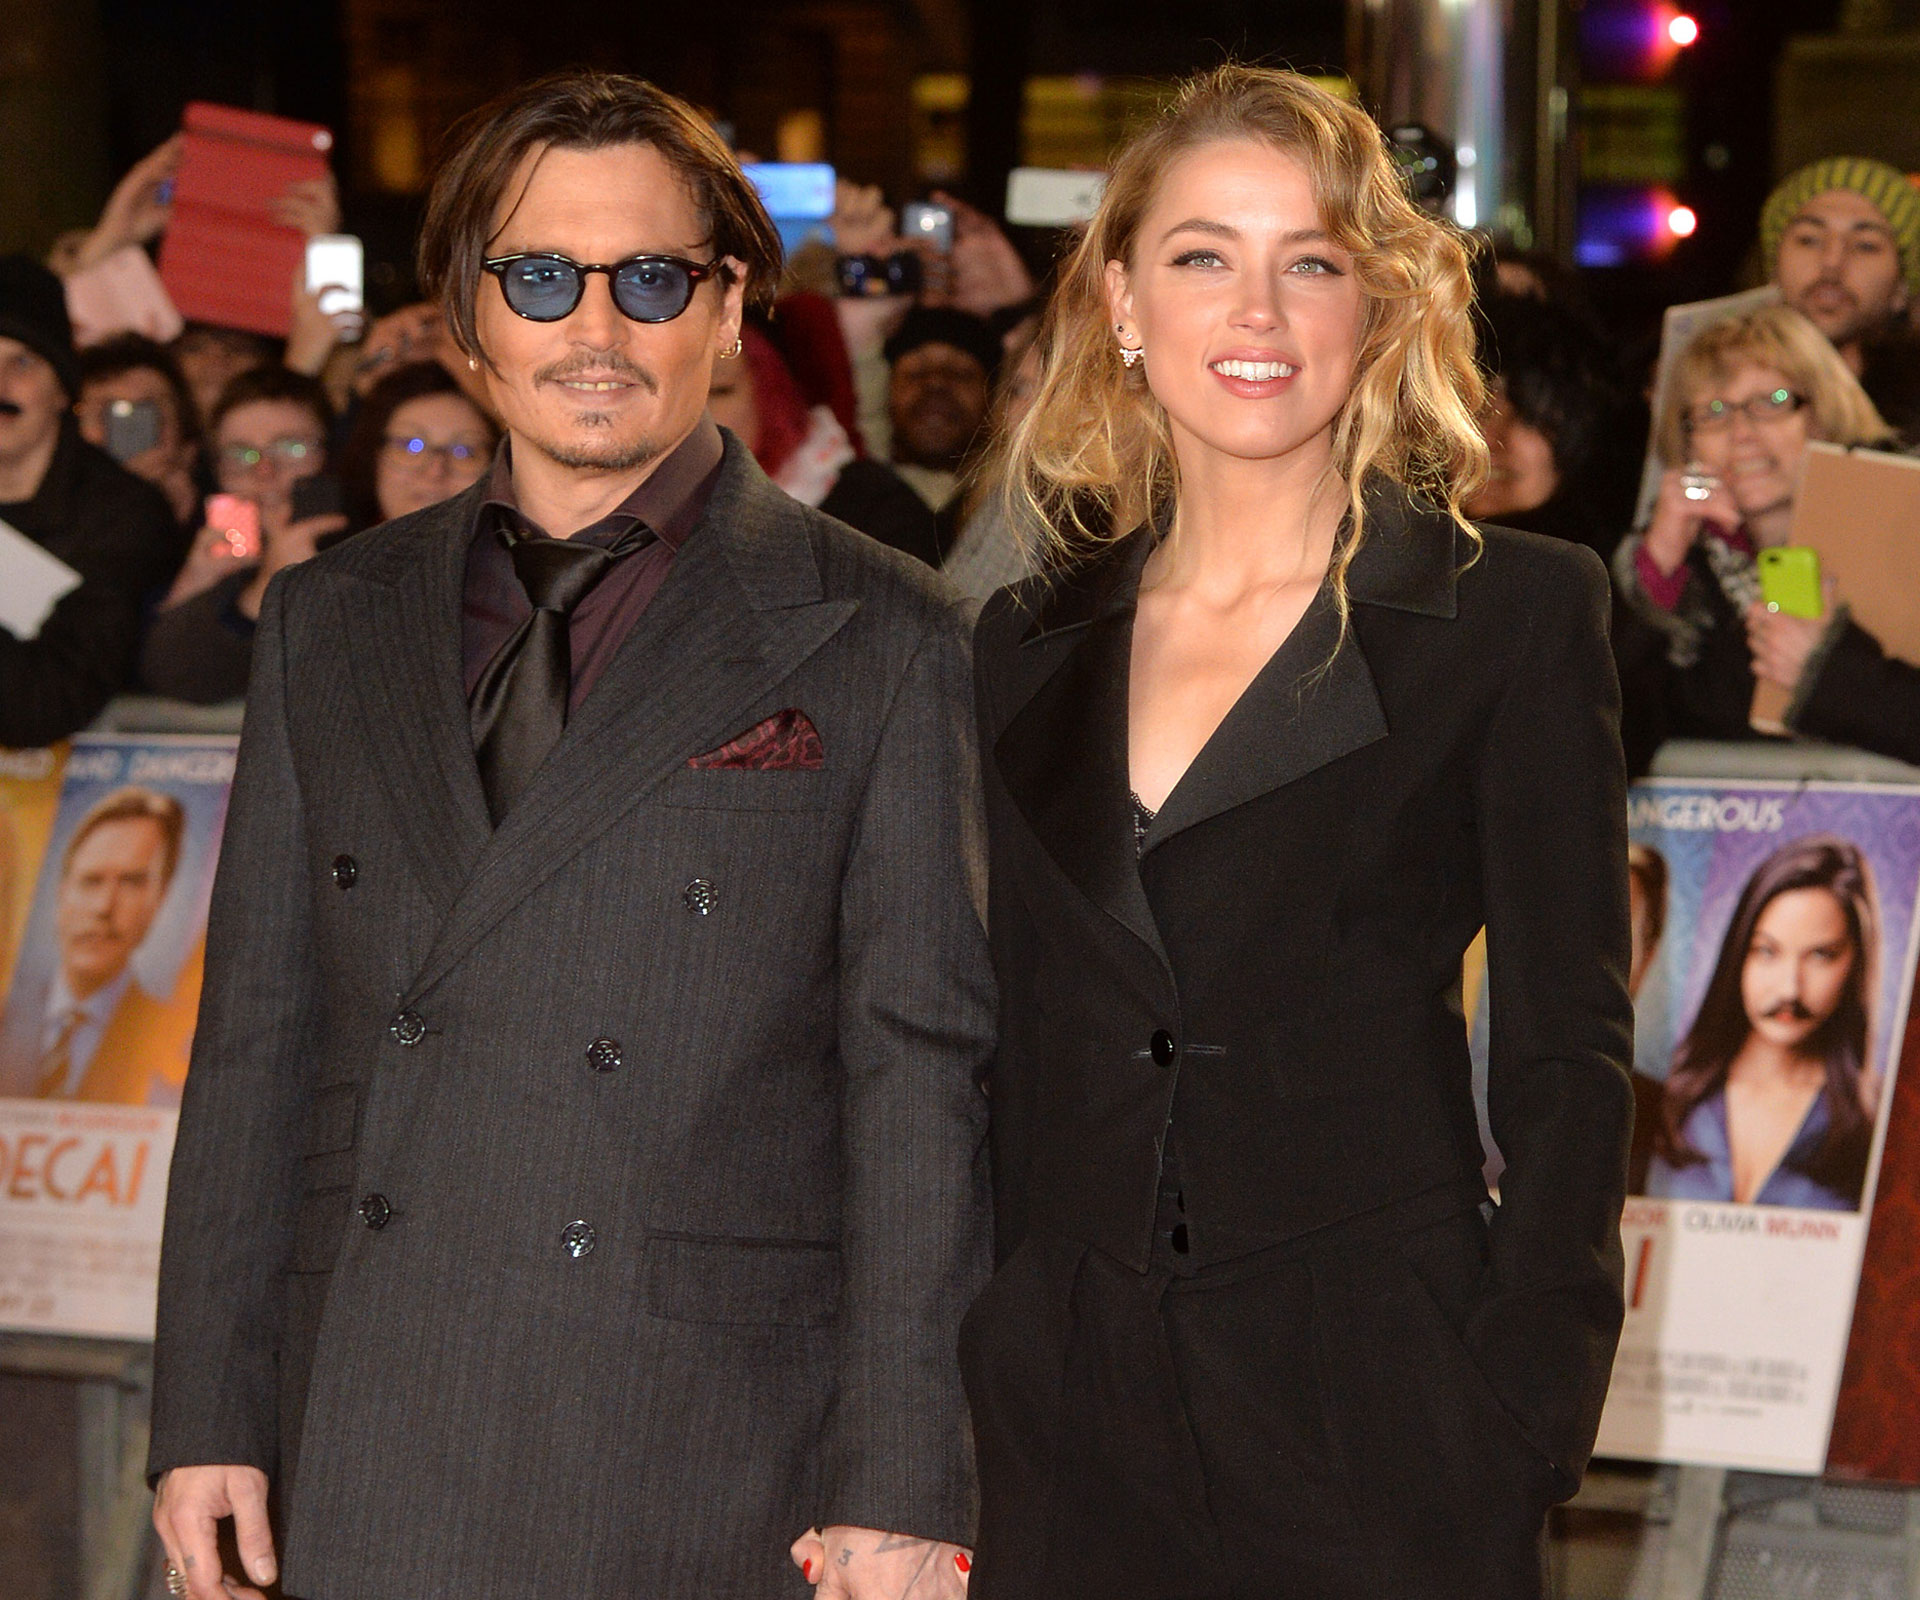 Johnny Depp cut off finger in drunken rage at wife Amber Heard over cheating allegations